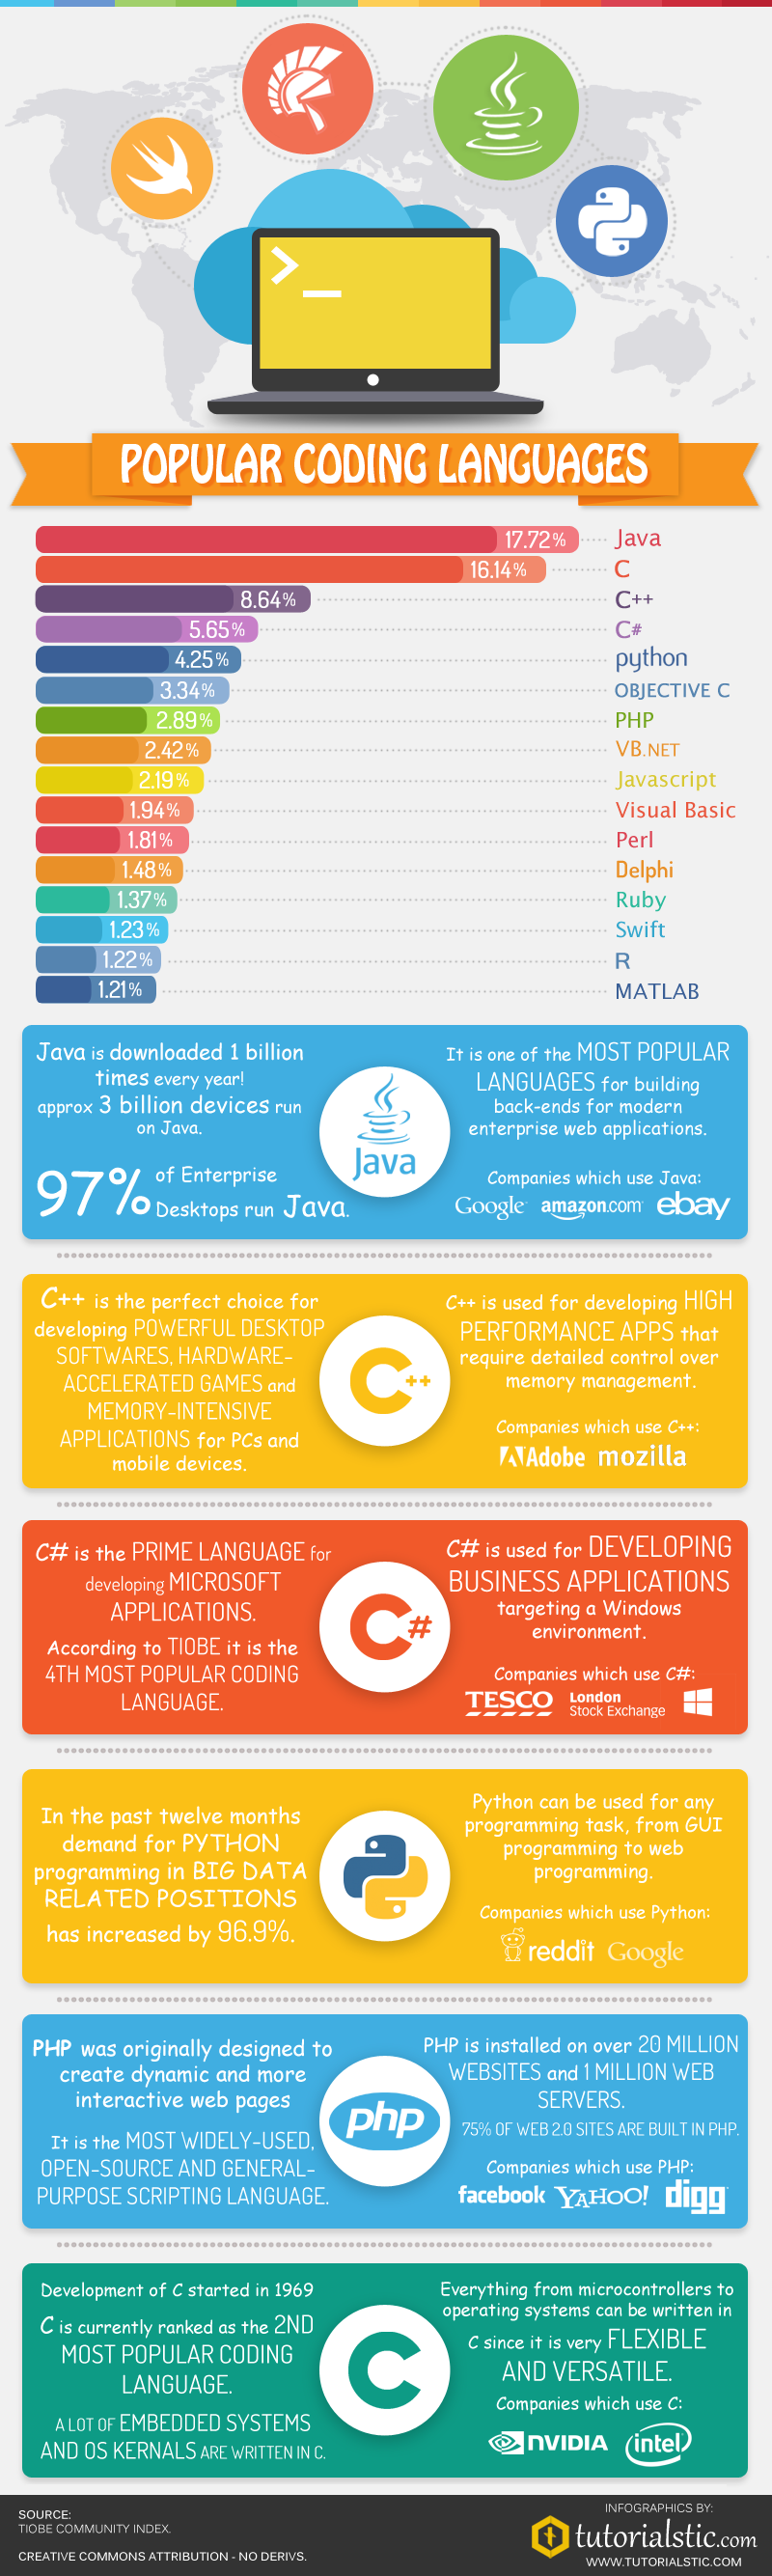 most-popular-coding-languages-2015-extended-infographic